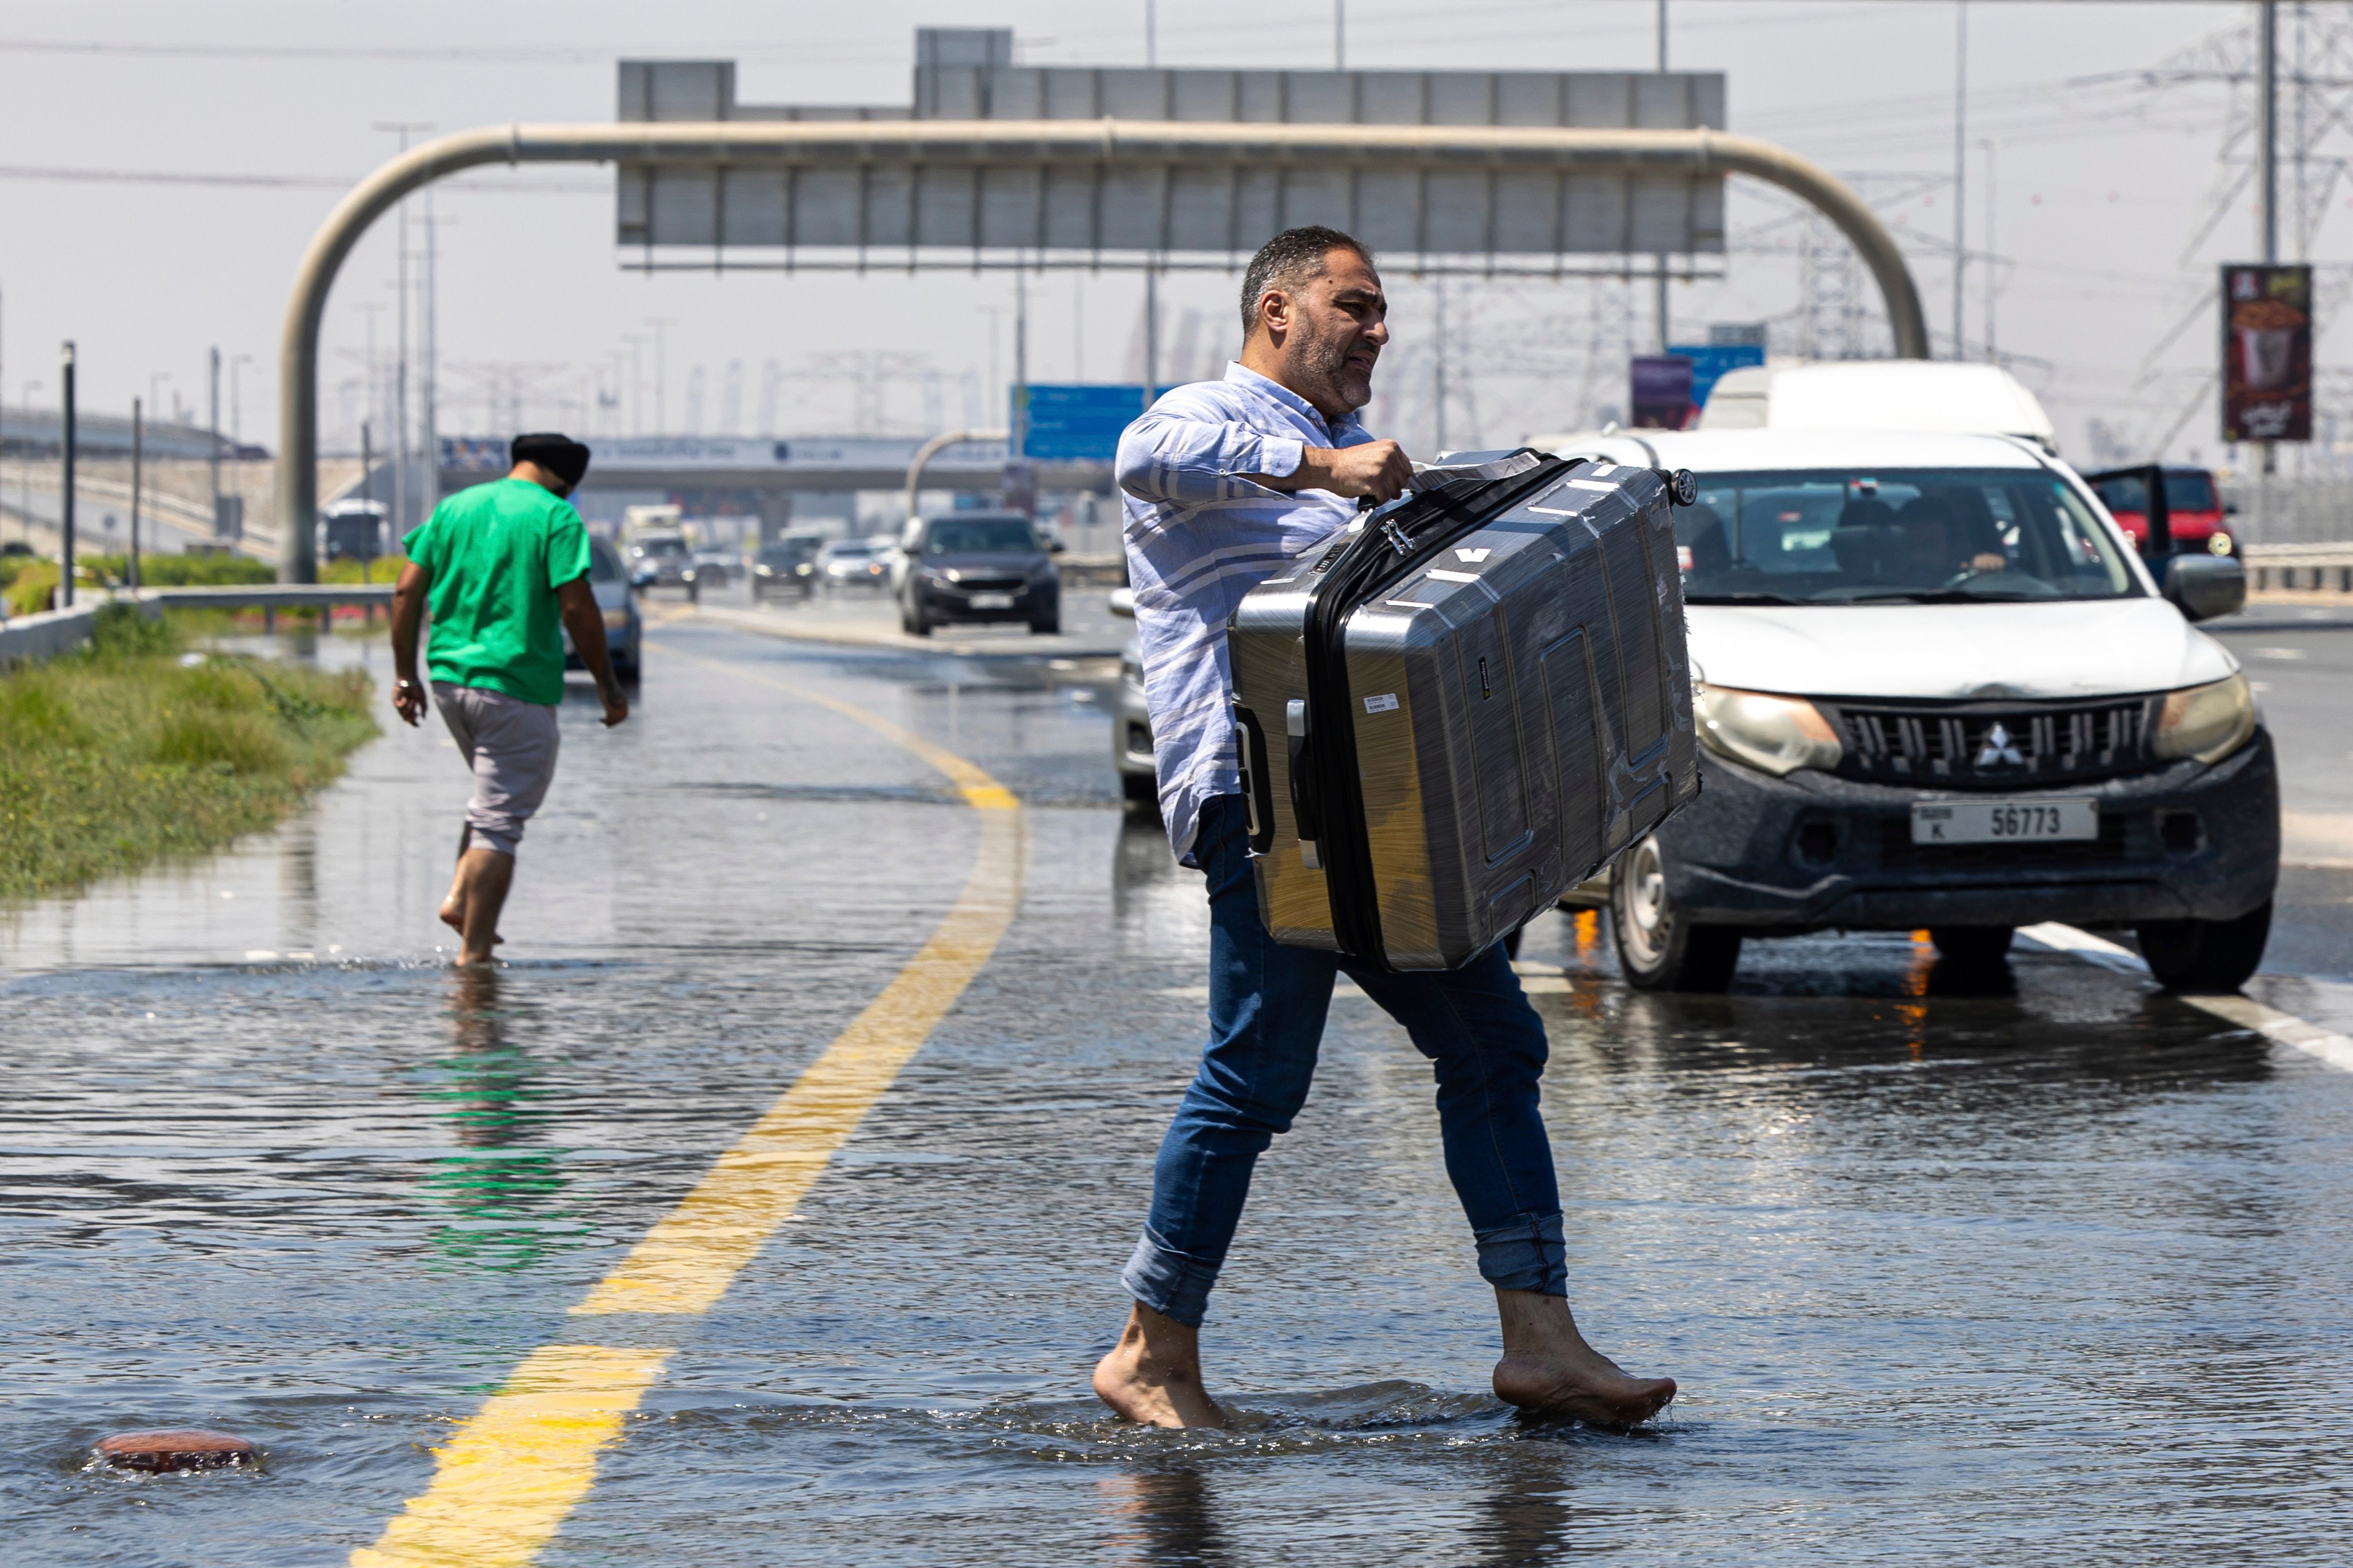 A man carries luggage through floodwater on Sheikh Zayed Road highway in Dubai. Photo: AP